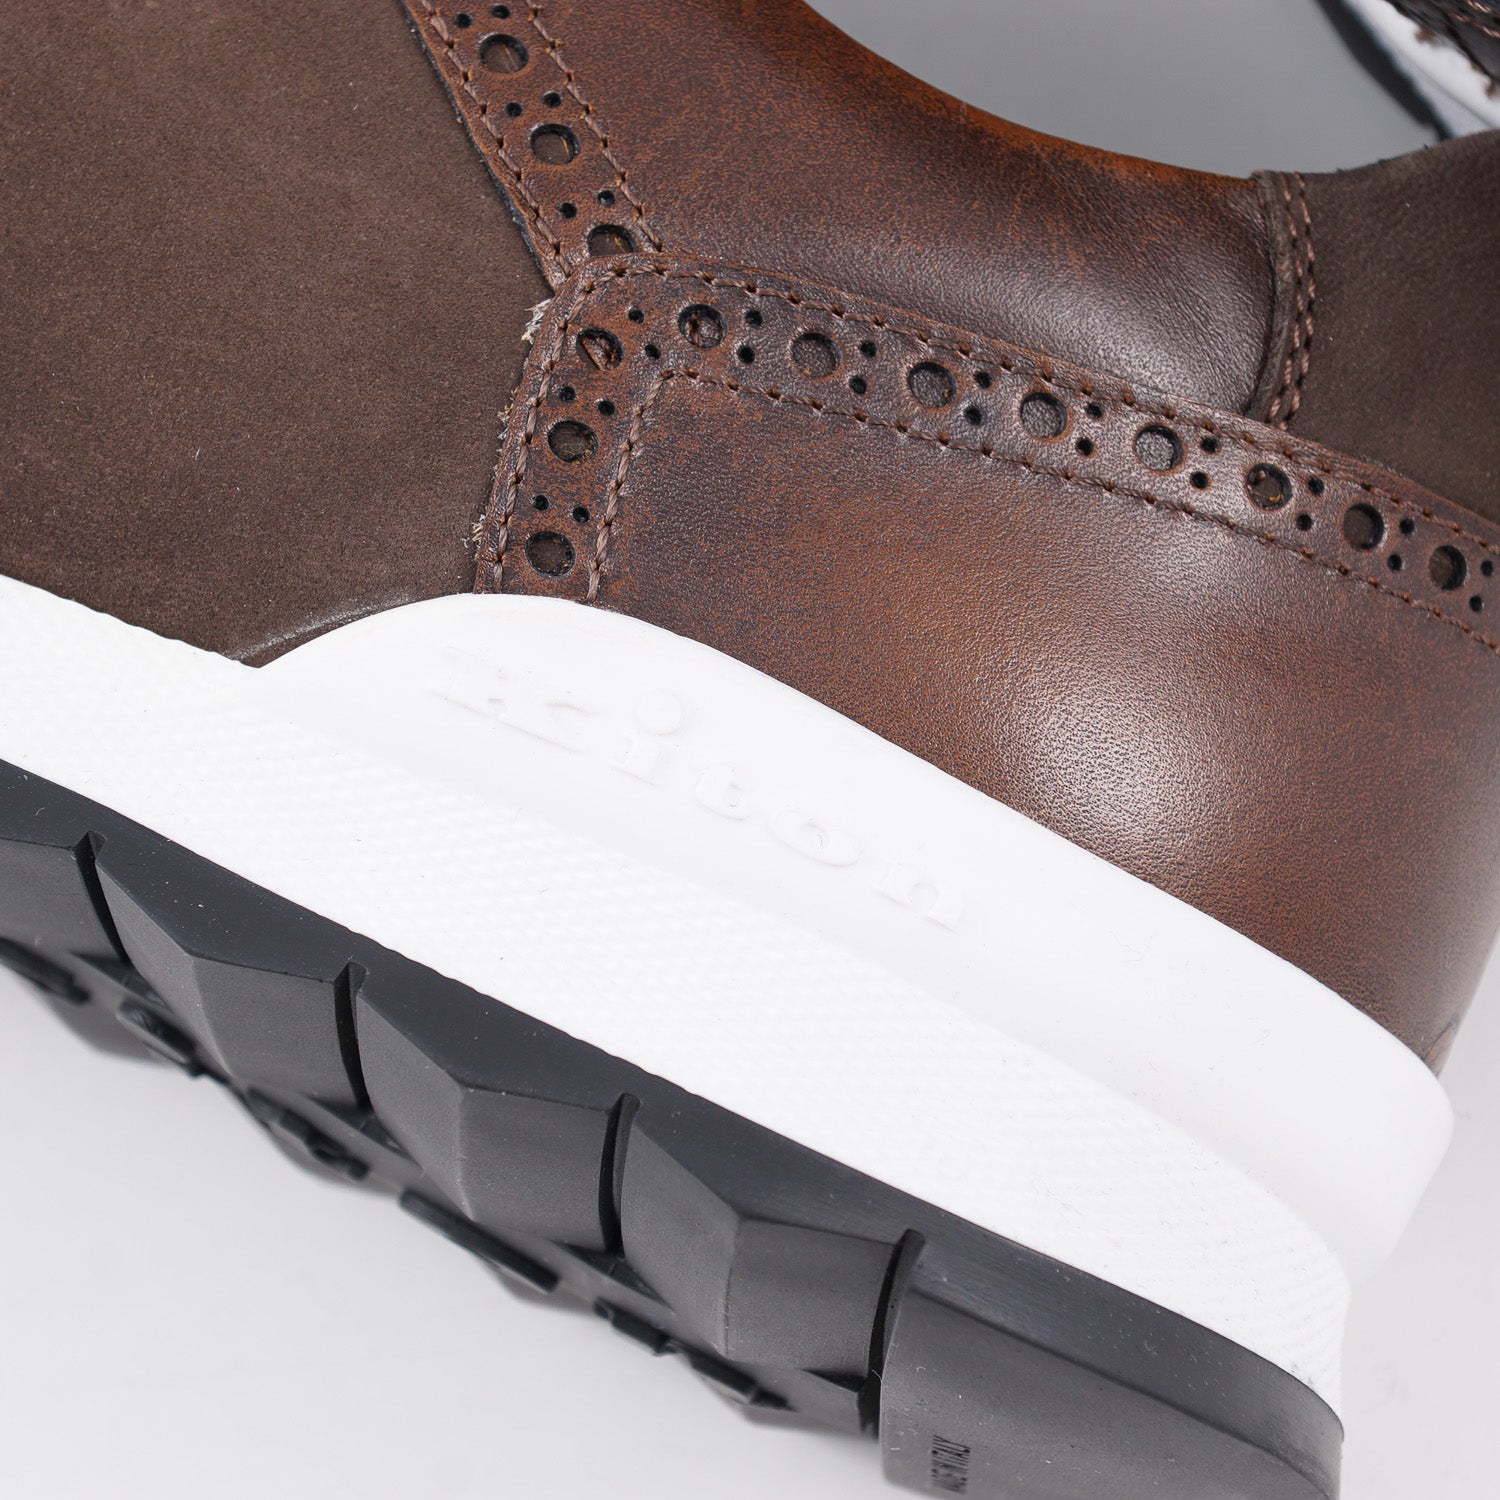 Kiton Calf Leather and Suede Sneakers - Top Shelf Apparel